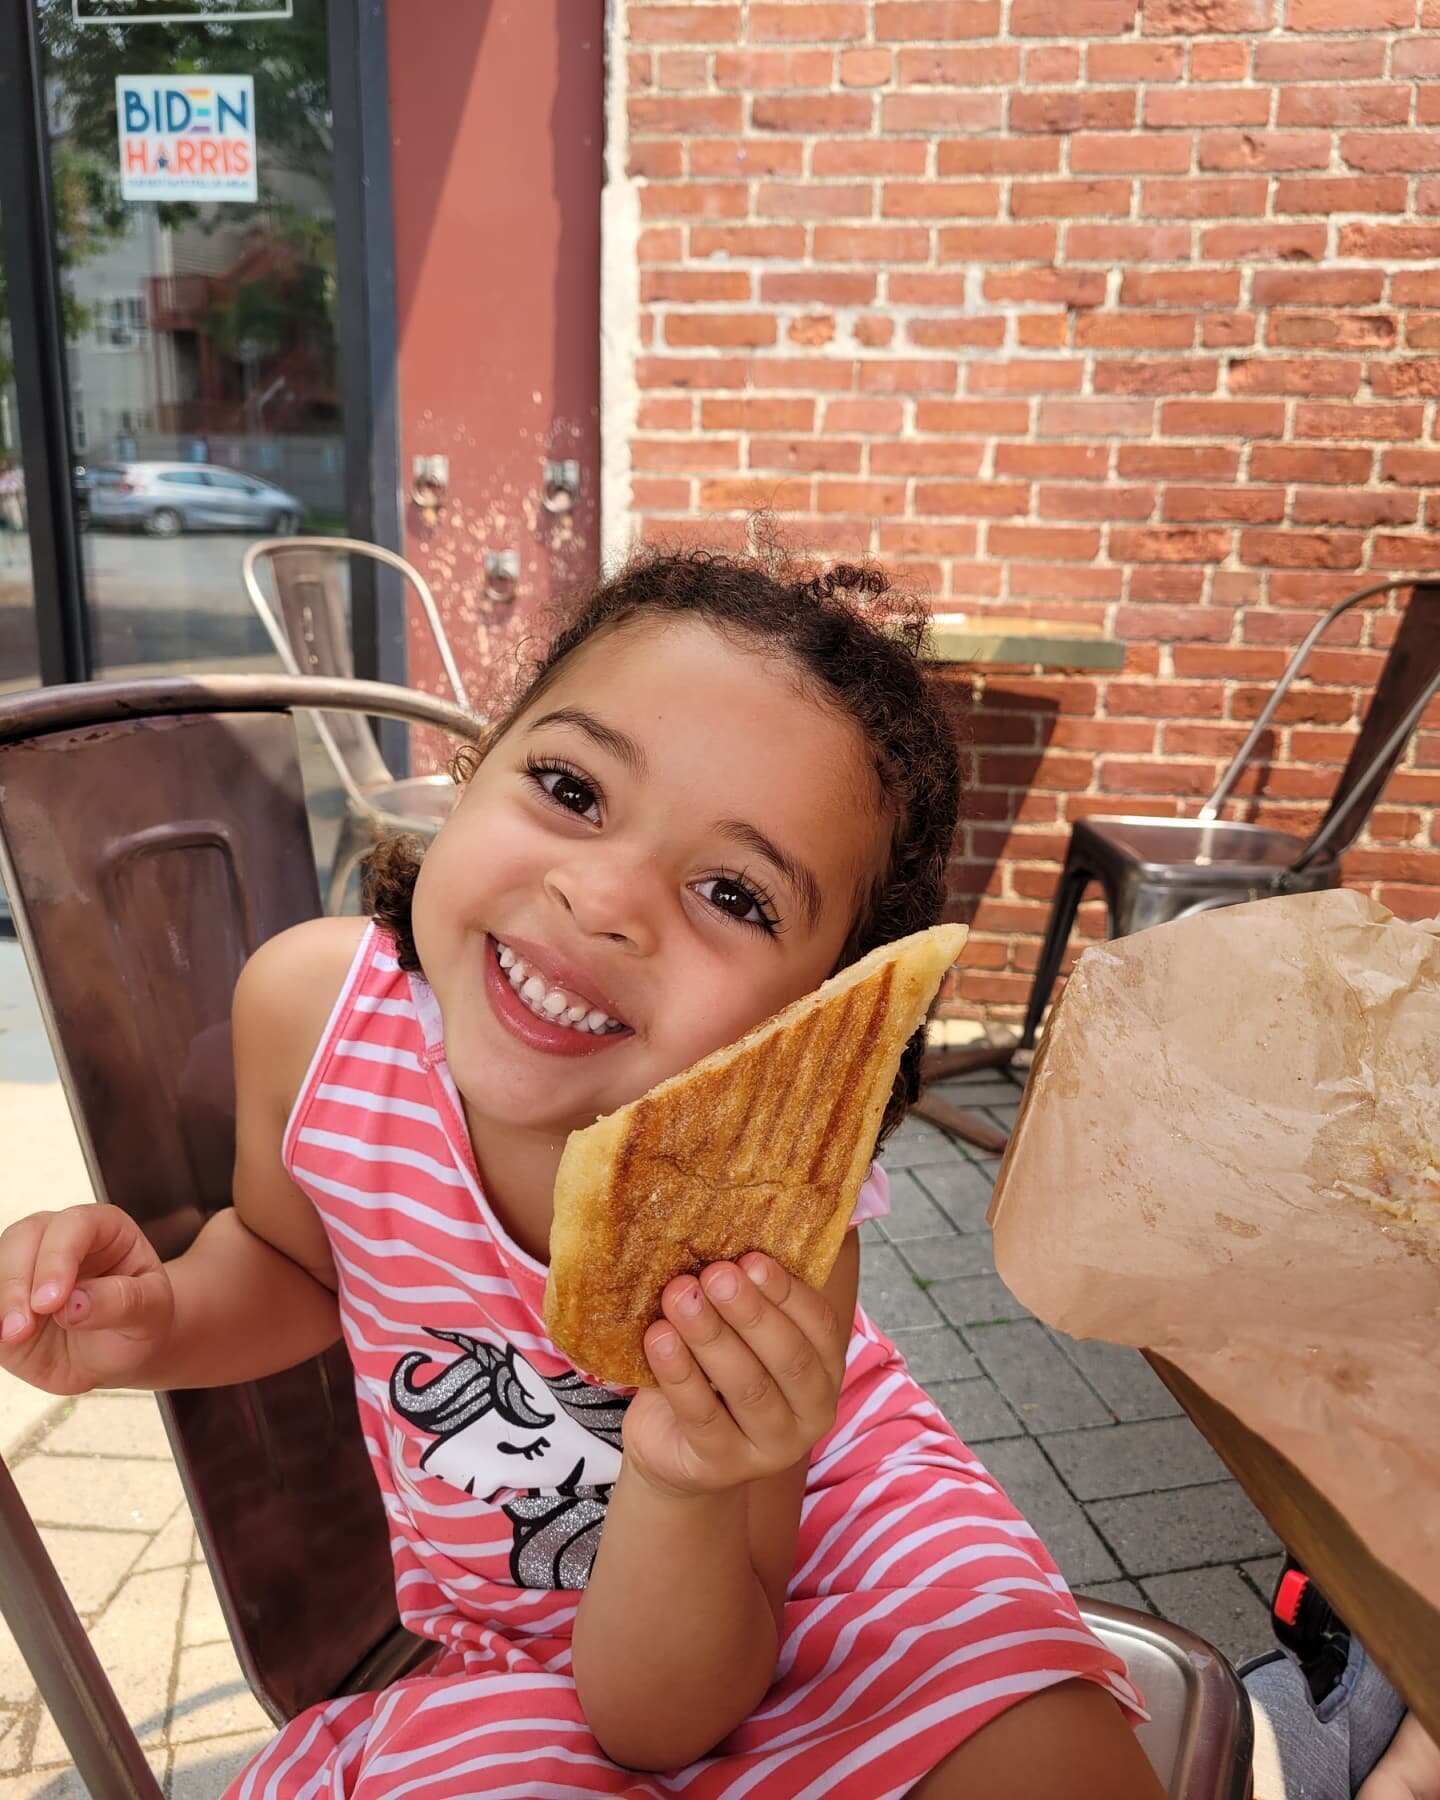 It's a great day for grilled cheese on the patio!

Featured: Marvin and Beth's daughter, Nora ❤

#UlaCafe #WeAreUla #JamaicaPlain #BostonFoodies #CafesOfBoston #JPLife #PatioSeason #VisitMA #VisitBoston #BostonLocal #MALocal